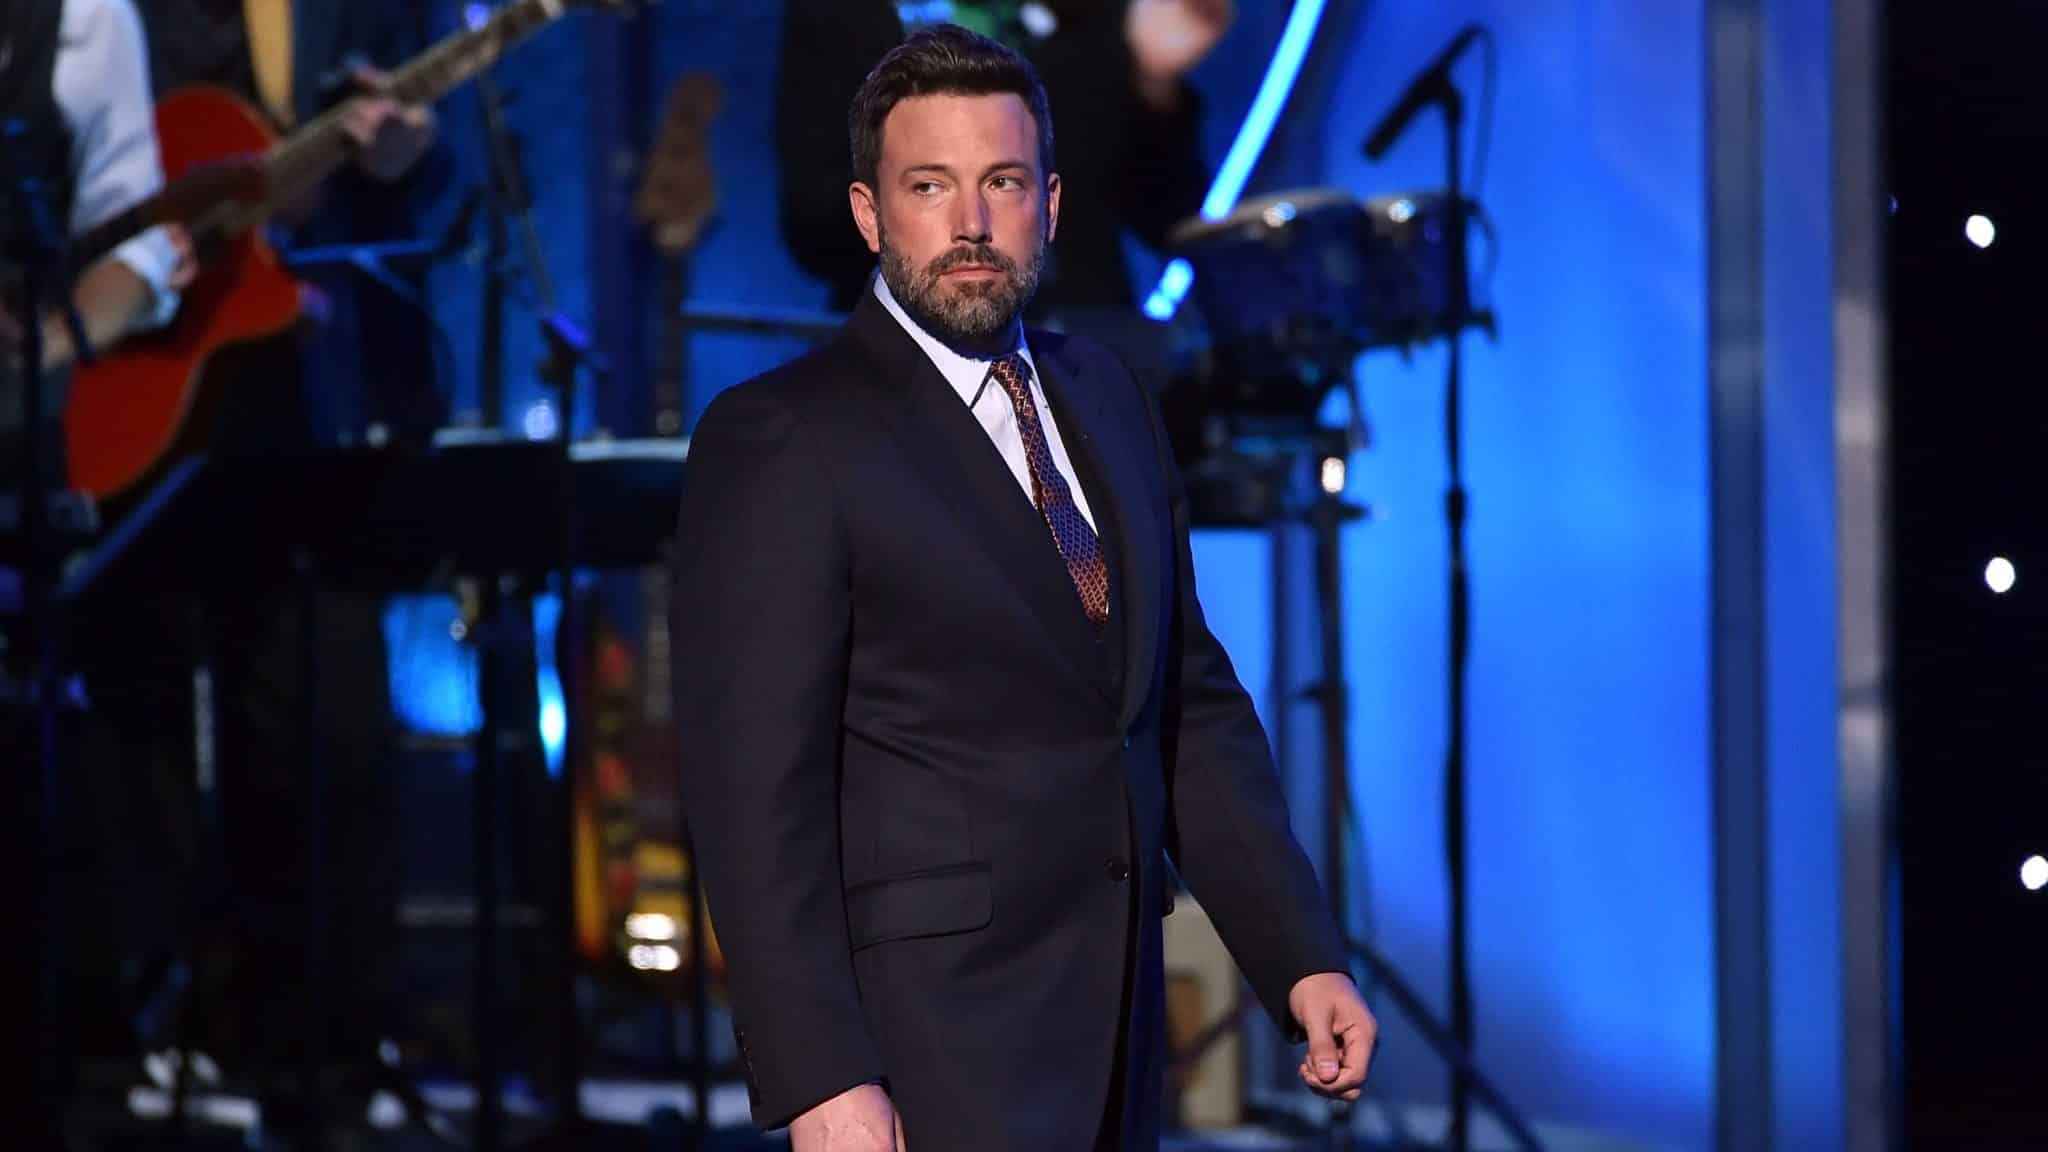 LOS ANGELES, CA - JULY 15: Actor Ben Affleck speaks onstage during The 2015 ESPYS at Microsoft Theater on July 15, 2015 in Los Angeles, California.